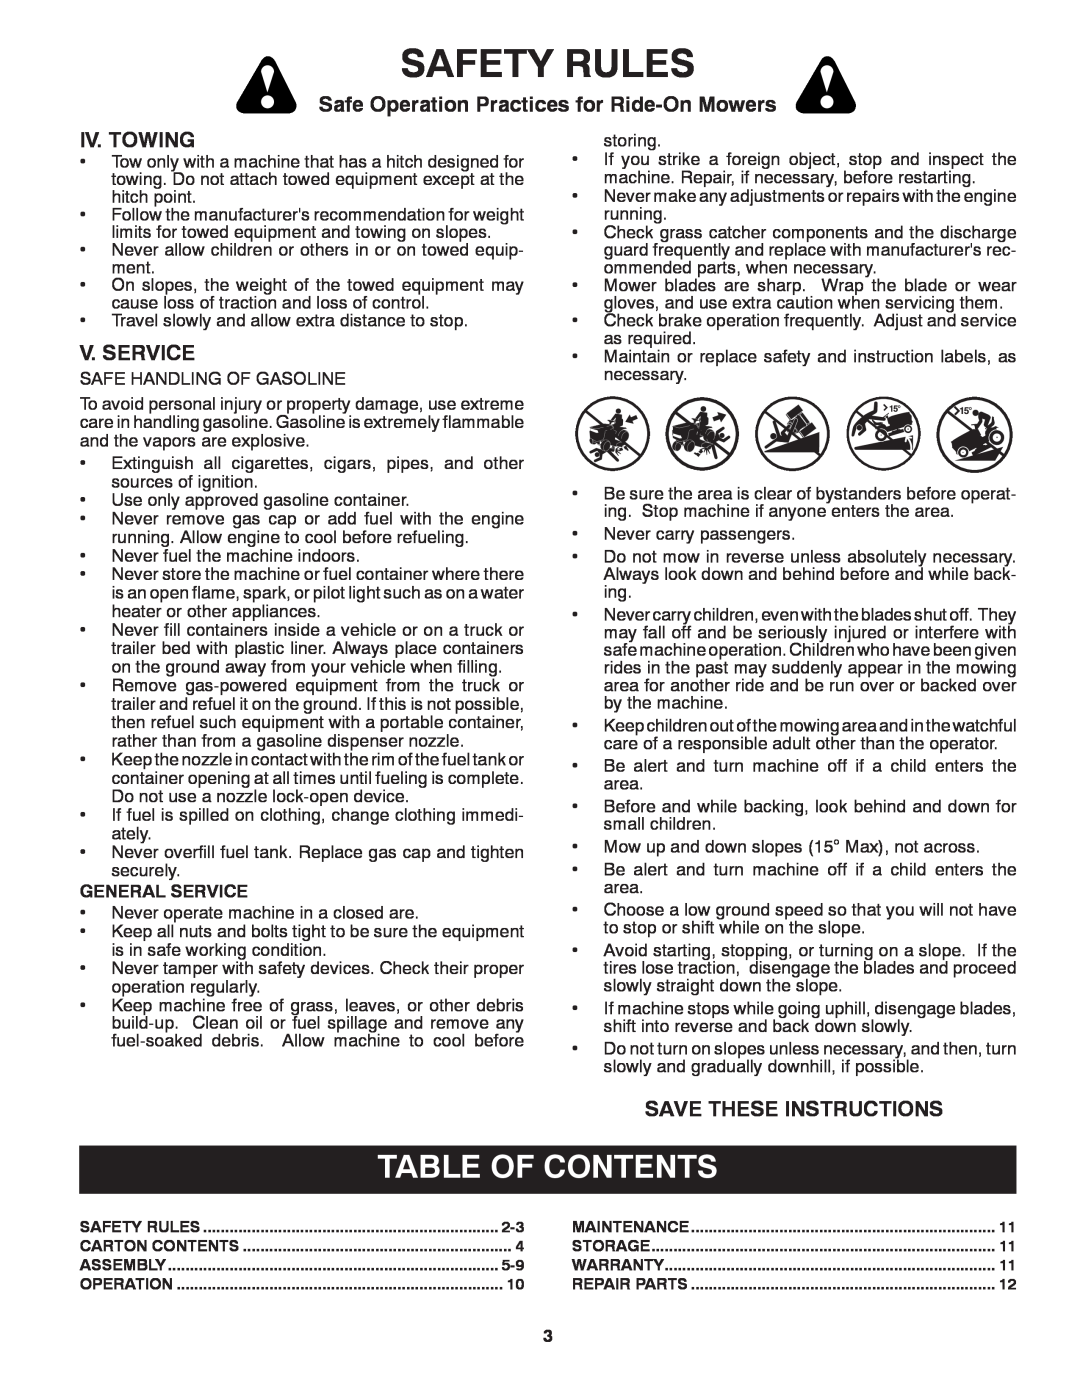 Craftsman 917.24991 manual Table Of Contents, Iv. Towing, V. Service, Save These Instructions, Safety Rules 